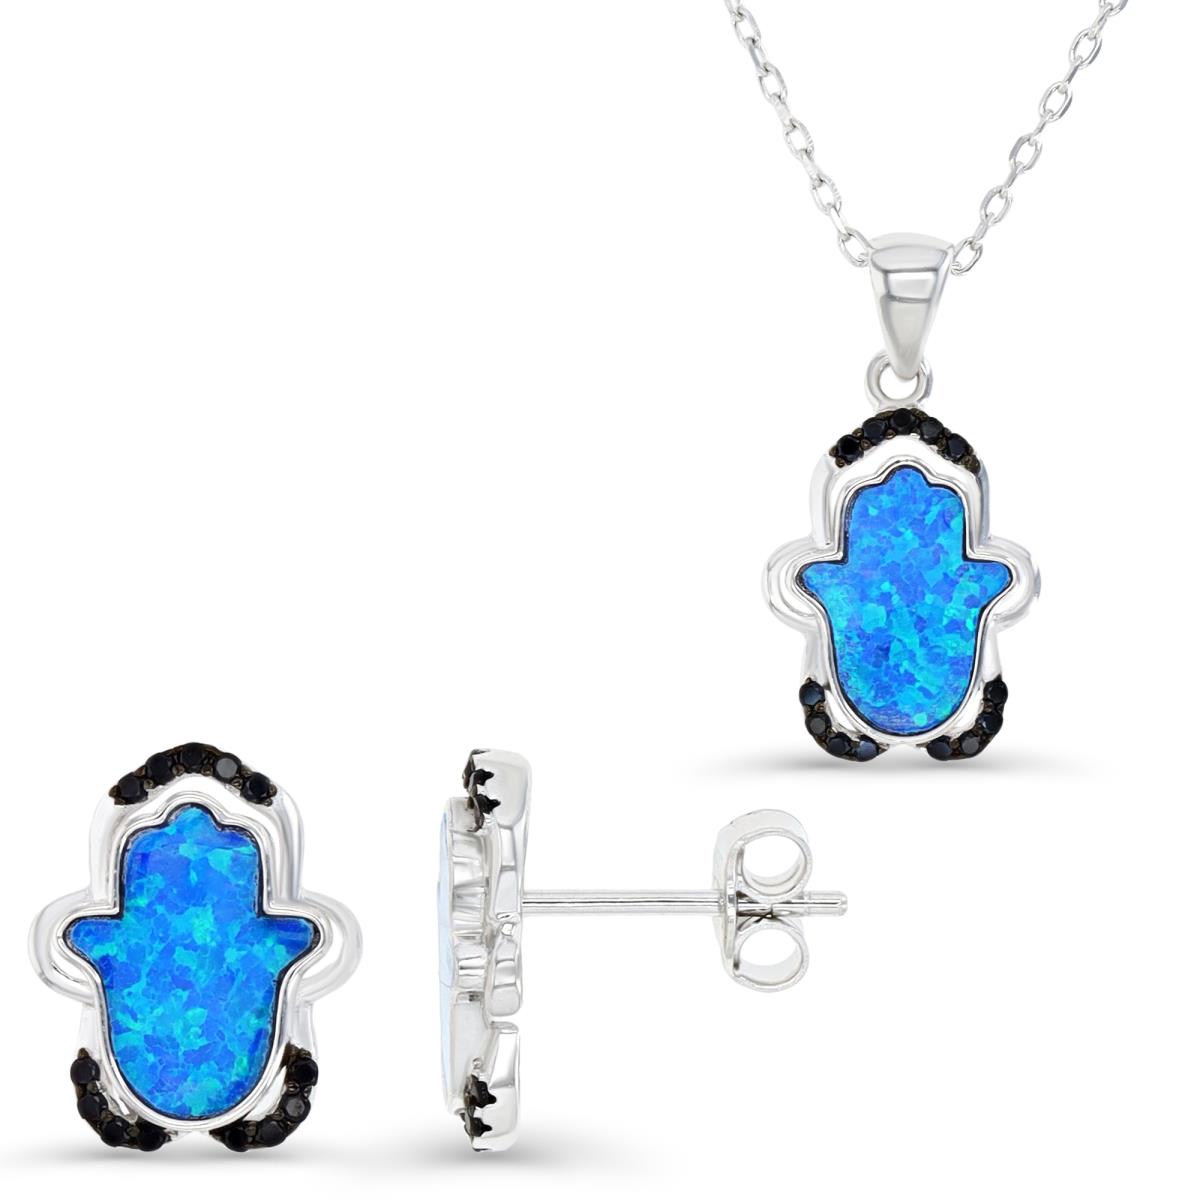 Sterling Silver Rhodium and Black & Cr. Blue Opal and Black Spniel Hamsa Earrings and Necklace Set